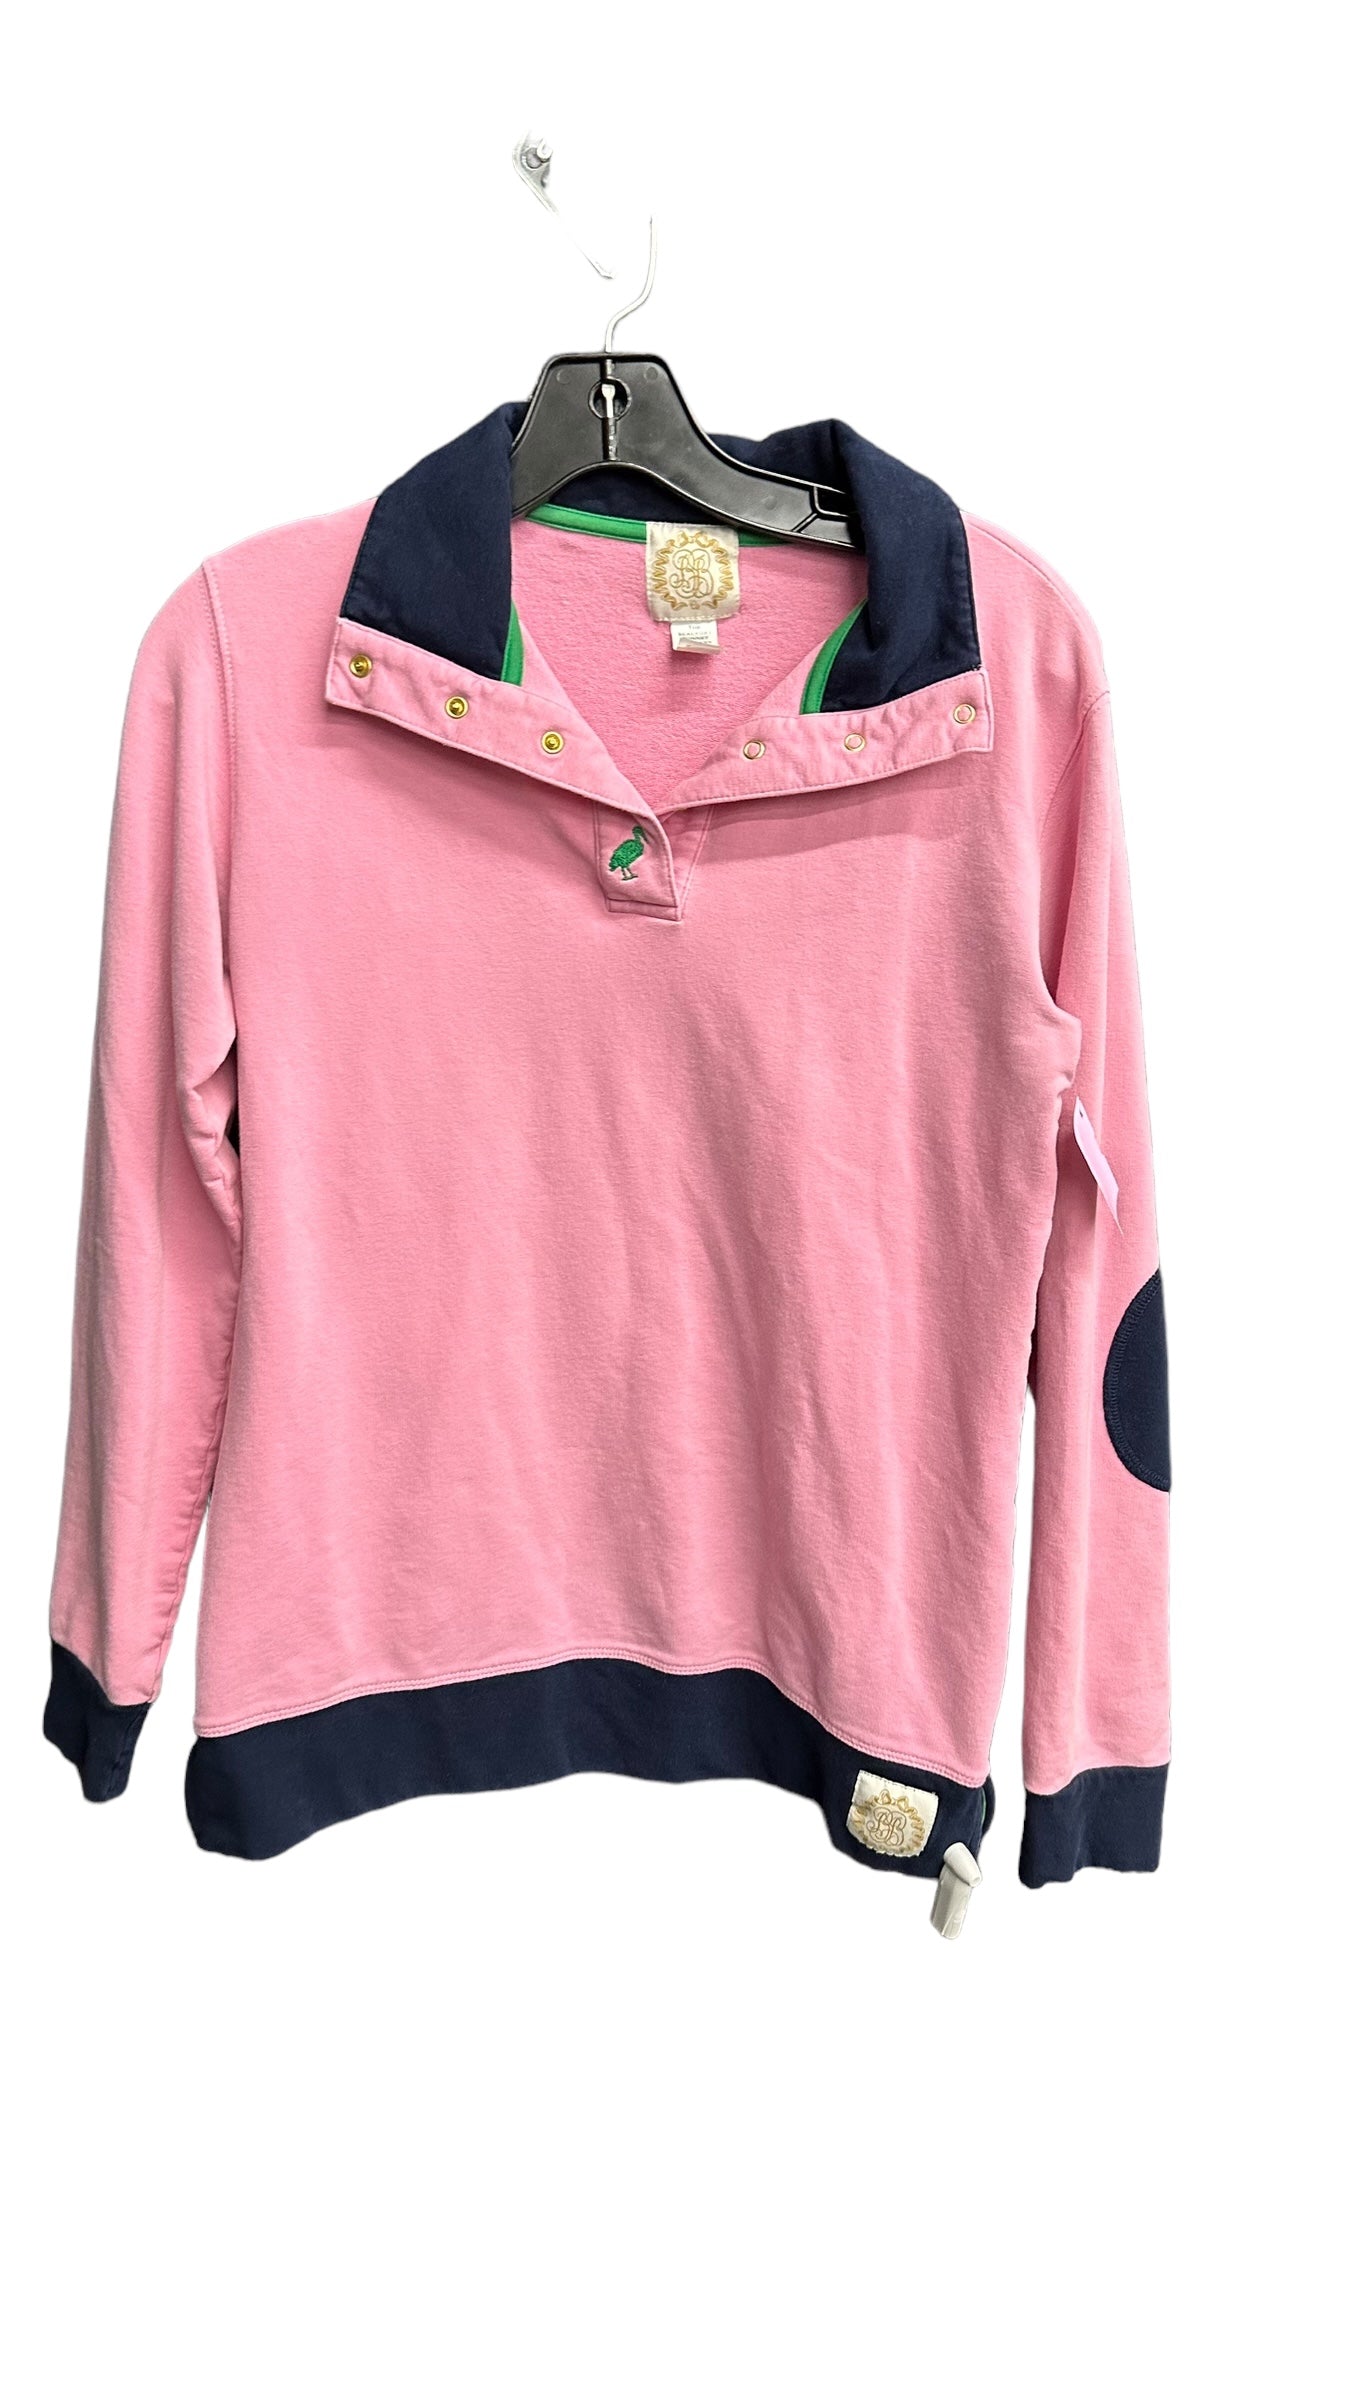 Pink Top Long Sleeve Clothes Mentor, Size S